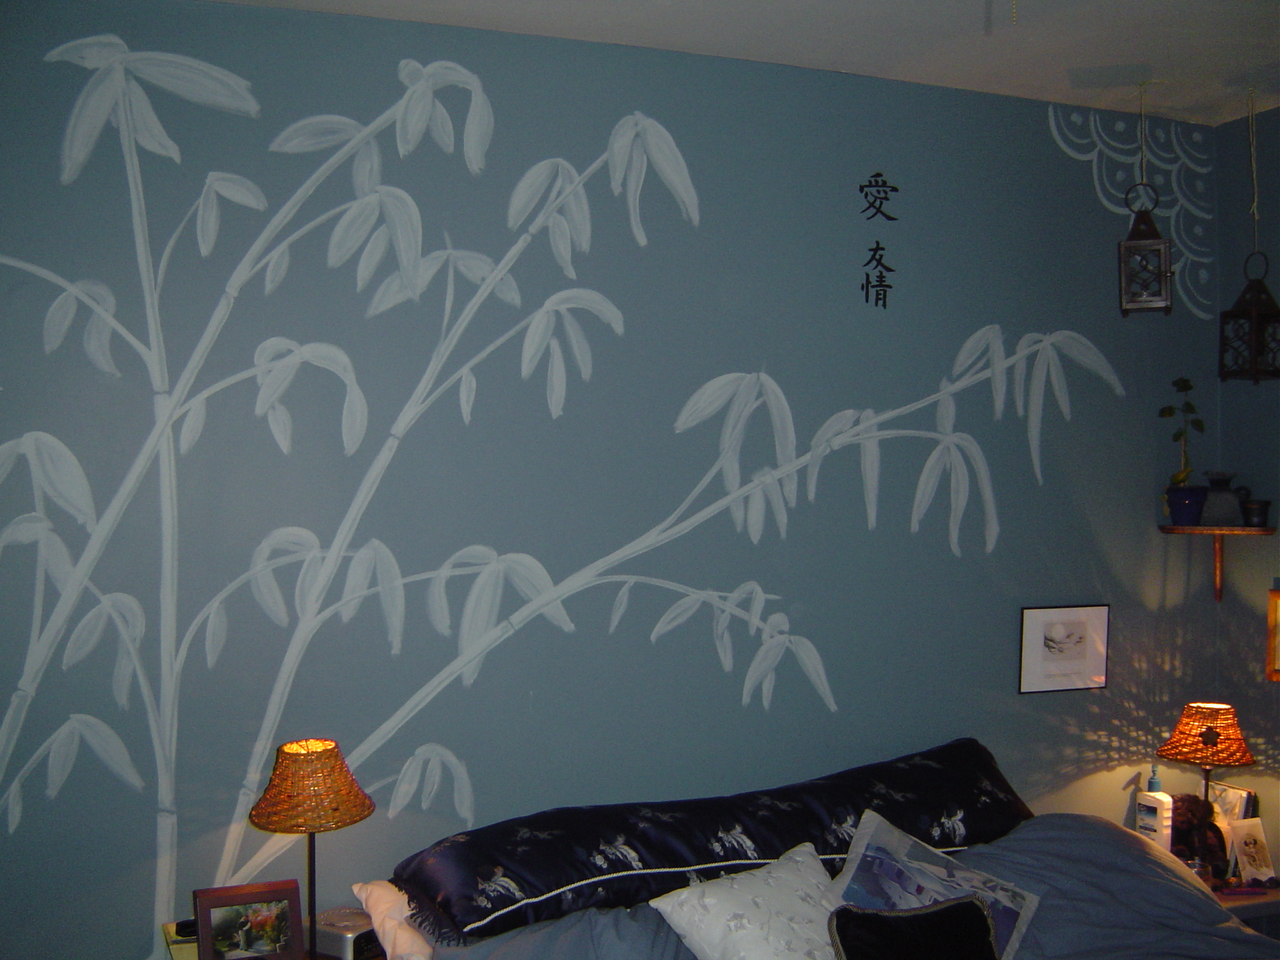  Art  Wall  Decor  Japanese  Wall  Murals Pictures